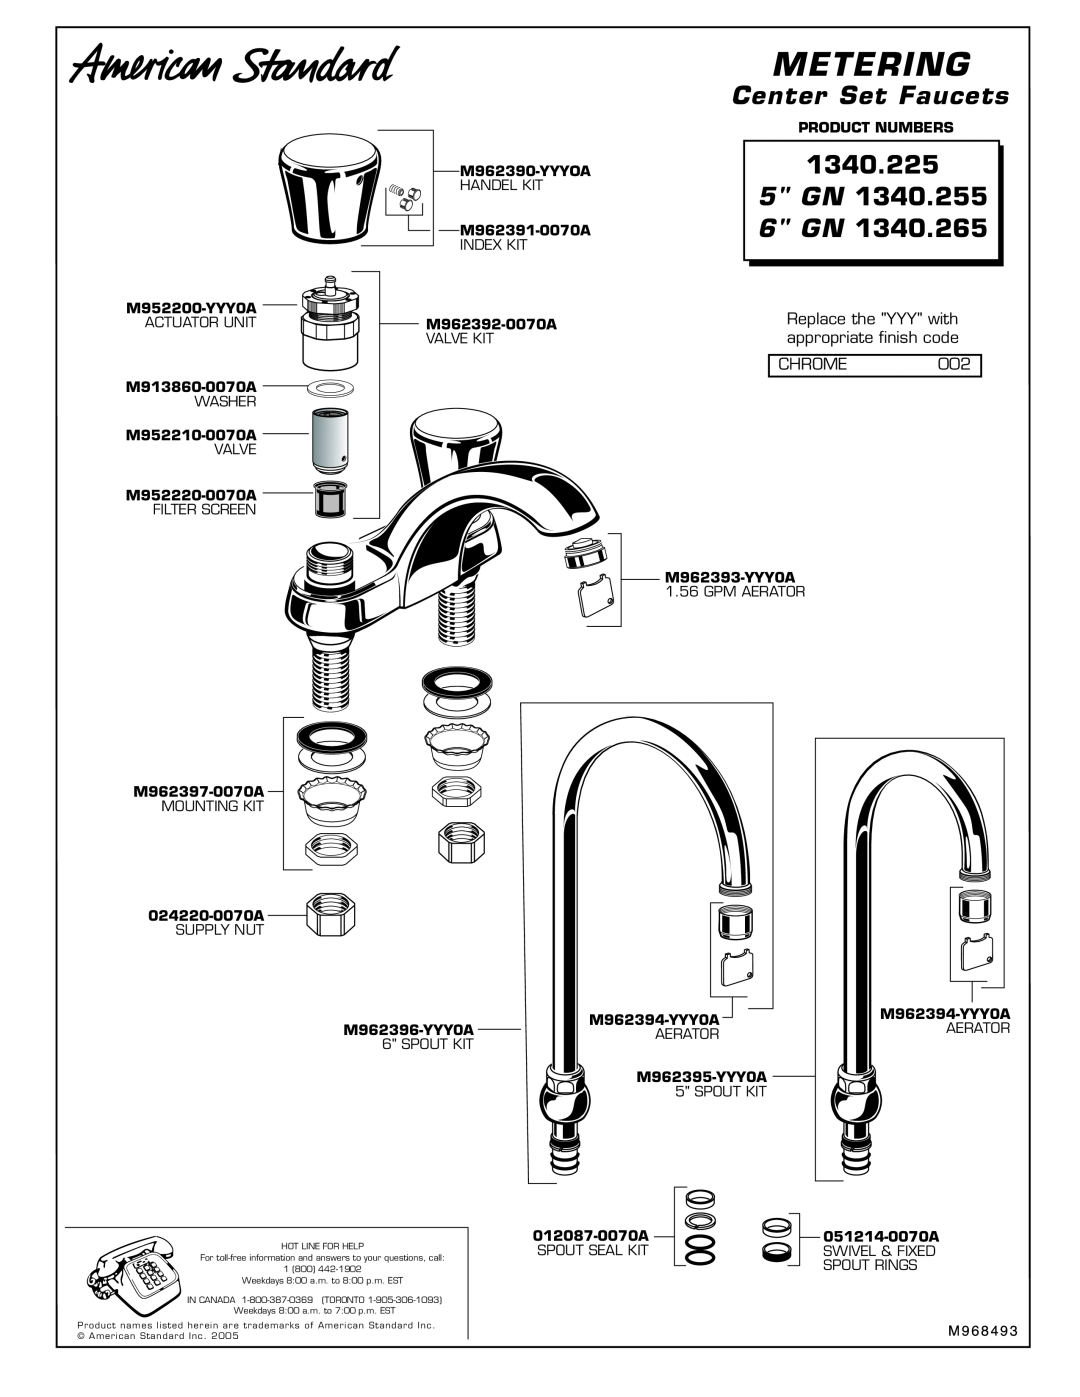 American Standard 1340.265, 1340.255 1340.225, 5 GN, 6 GN, Metering, Center Set Faucets, Replace the YYY with, Chrome 